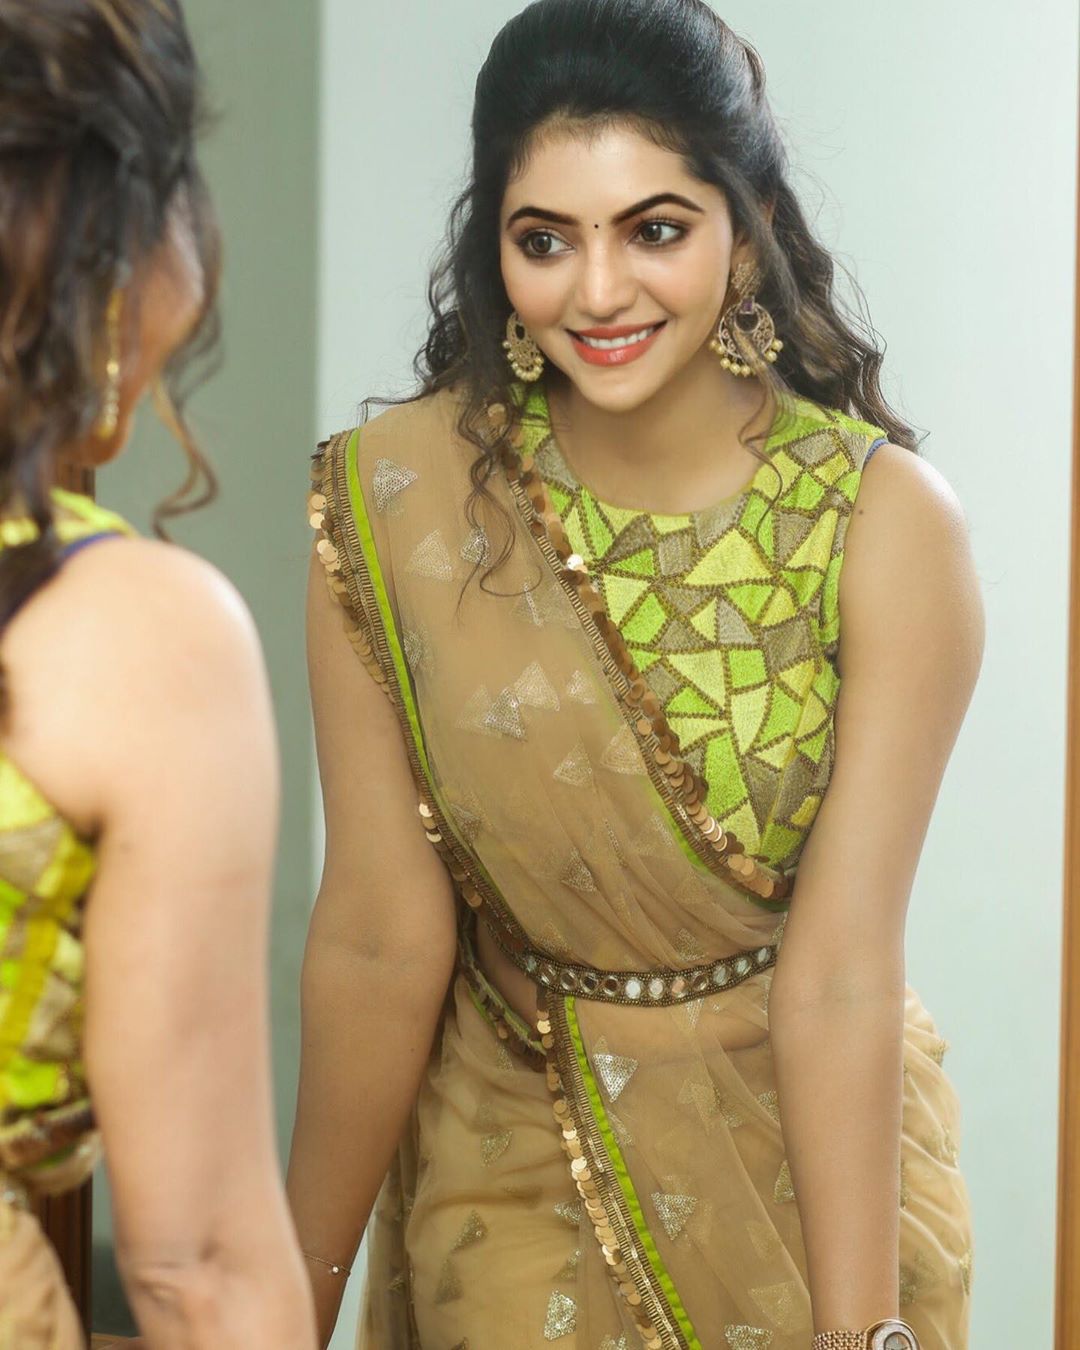 Athulya Looking Hot In Saree And Sleeveless Blouse With Hip Chain